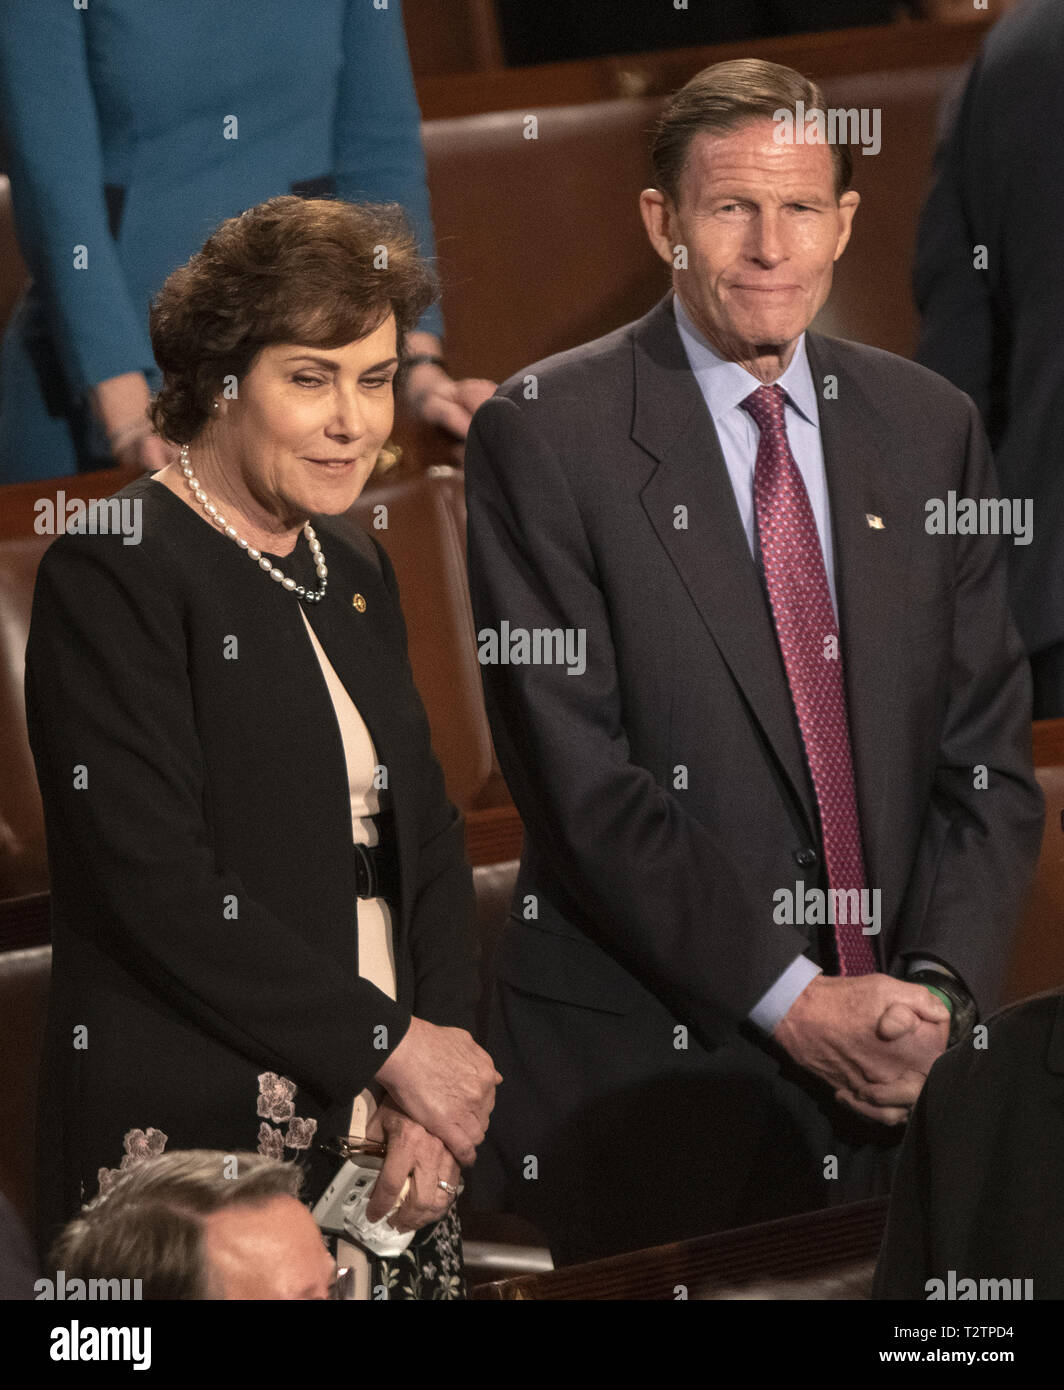 Washington, District of Columbia, USA. 3rd Apr, 2019. United States Senator Jacky Rosen (Democrat of Nevada), left, and US Senator Richard Blumenthal (Democrat of Connecticut), right, on the floor of the US House Chamber prior to the arrival of Jens Stoltenberg, Secretary General of the North Atlantic Treaty Organization (NATO) who will address a joint session of the United States Congress in the US Capitol in Washington, DC on Wednesday, April 3, 2019 Credit: Ron Sachs/CNP/ZUMA Wire/Alamy Live News Stock Photo